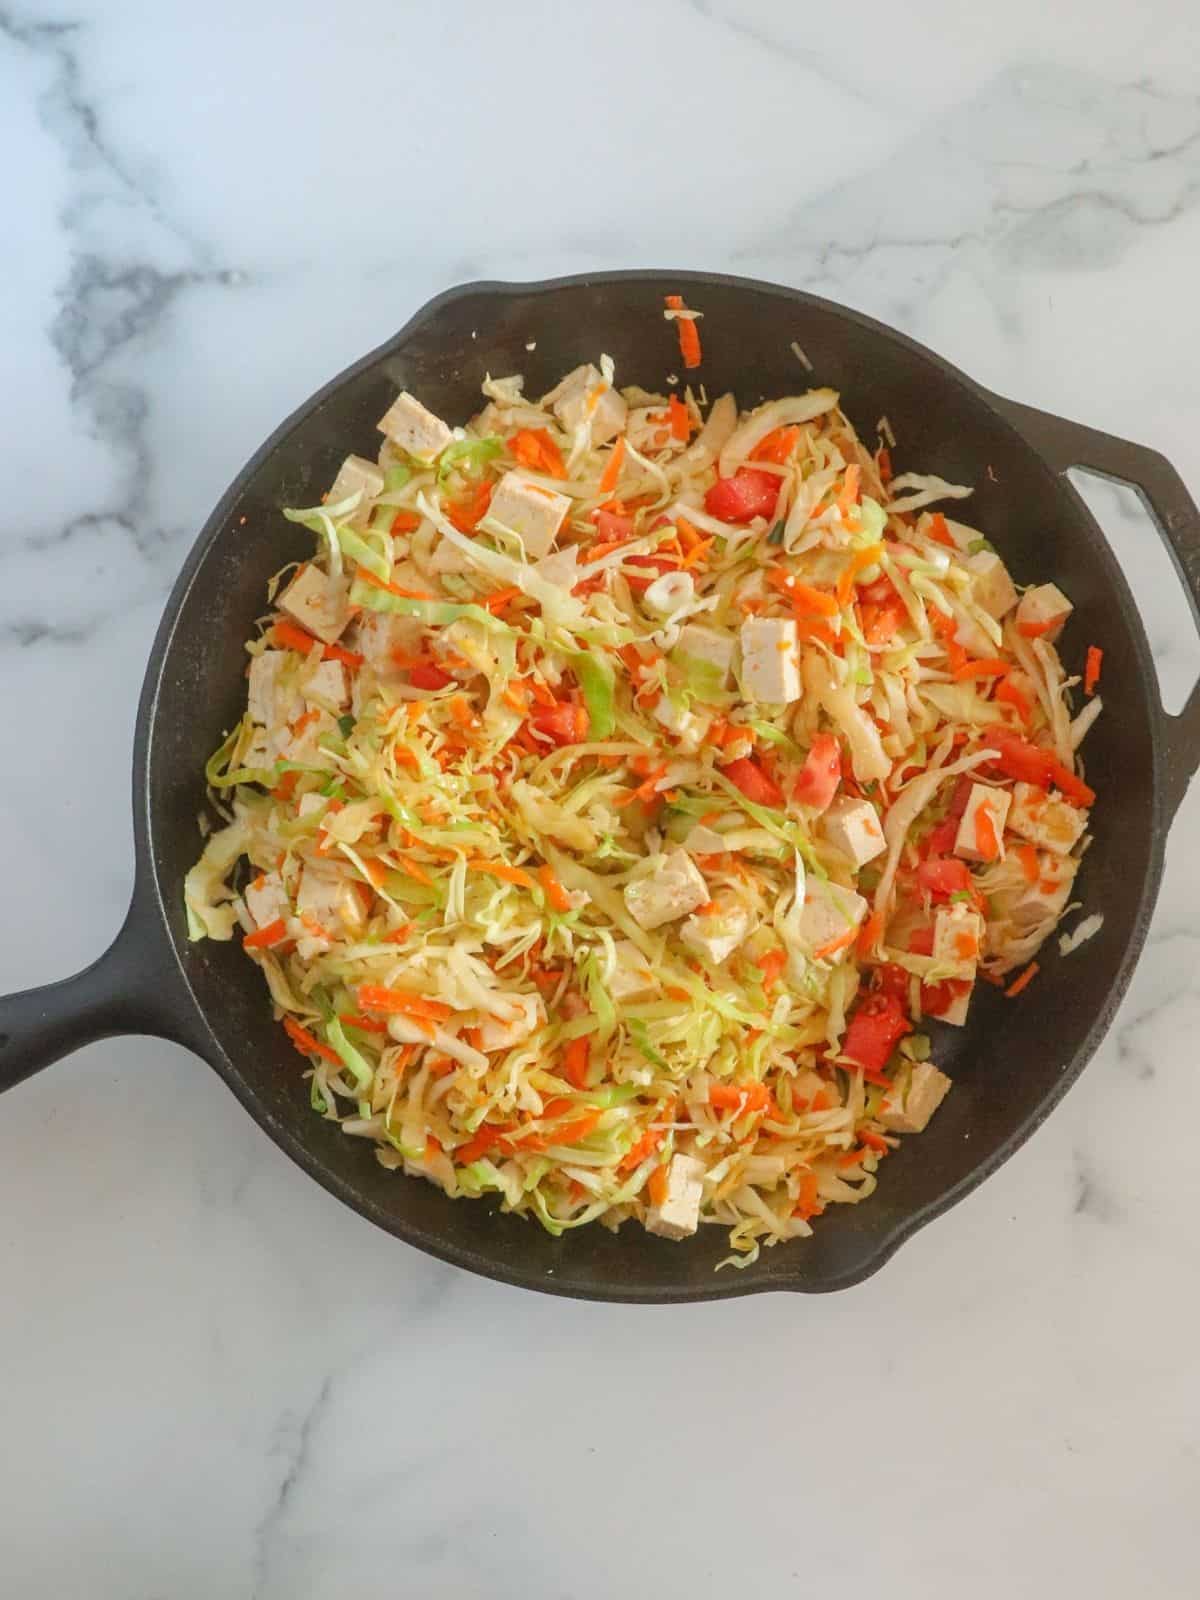 cabbage and vegetables in skillet